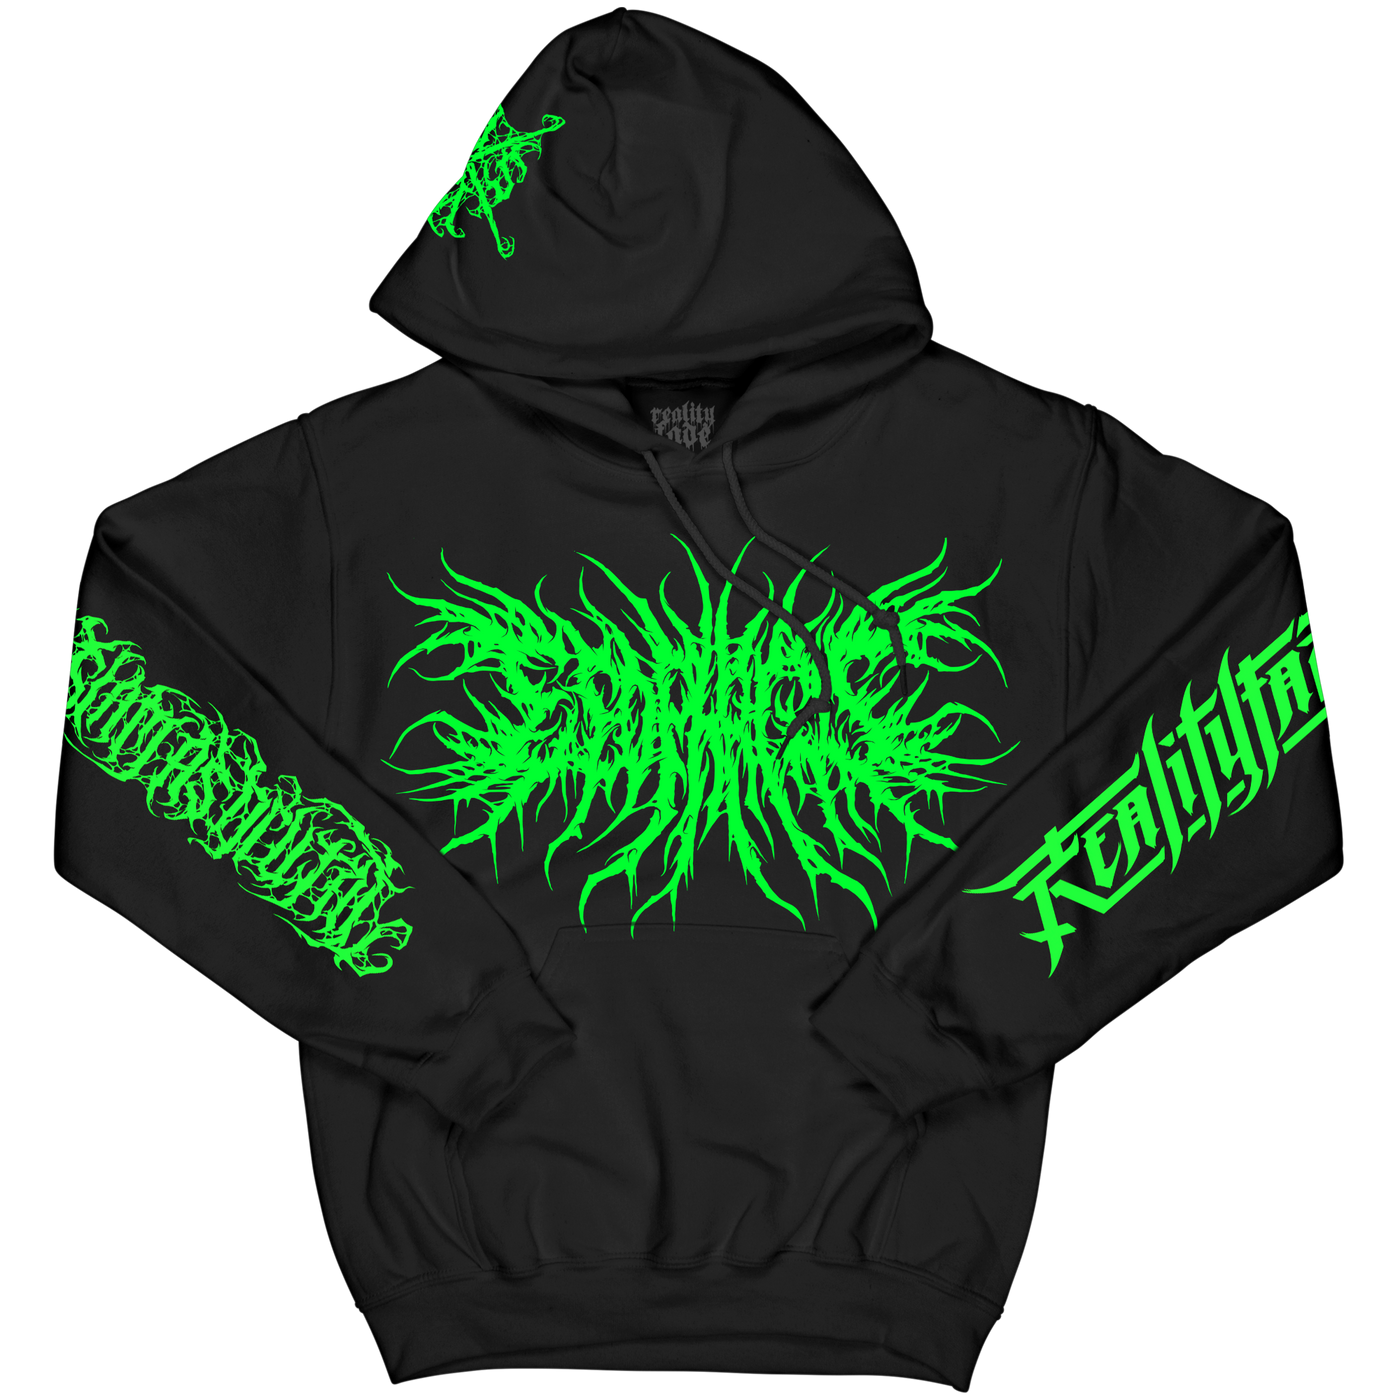 Esophagus 'Defeated by Their Inferiority' Hoodie